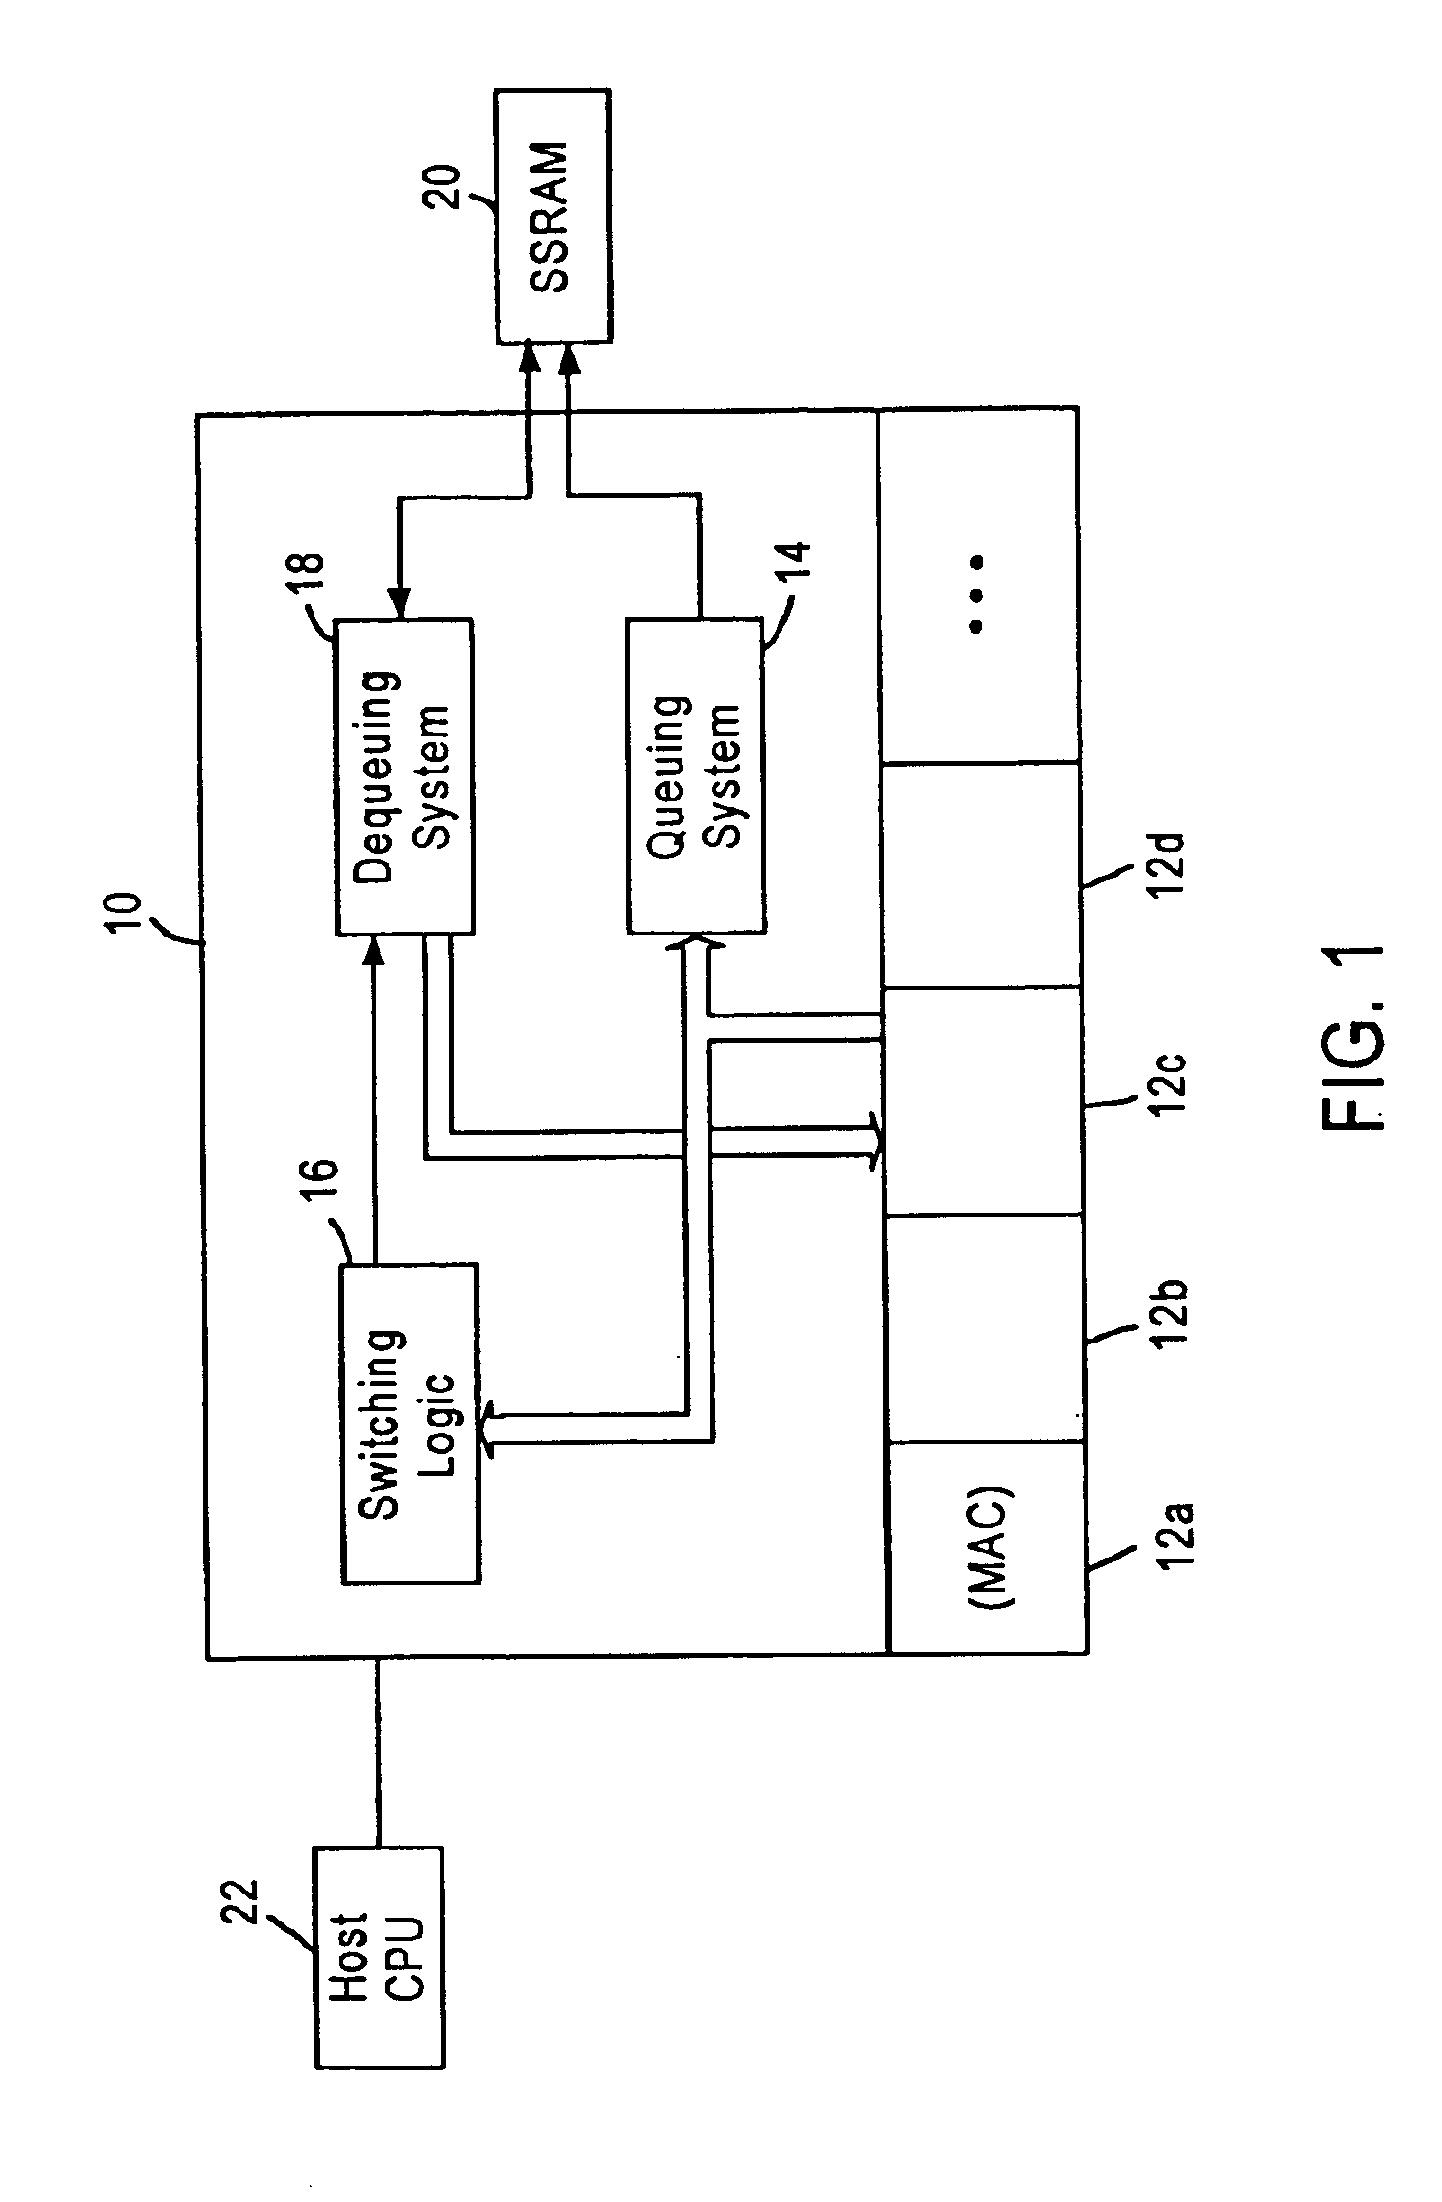 Weighted fair queuing approximation in a network switch using weighted round robin and token bucket filter